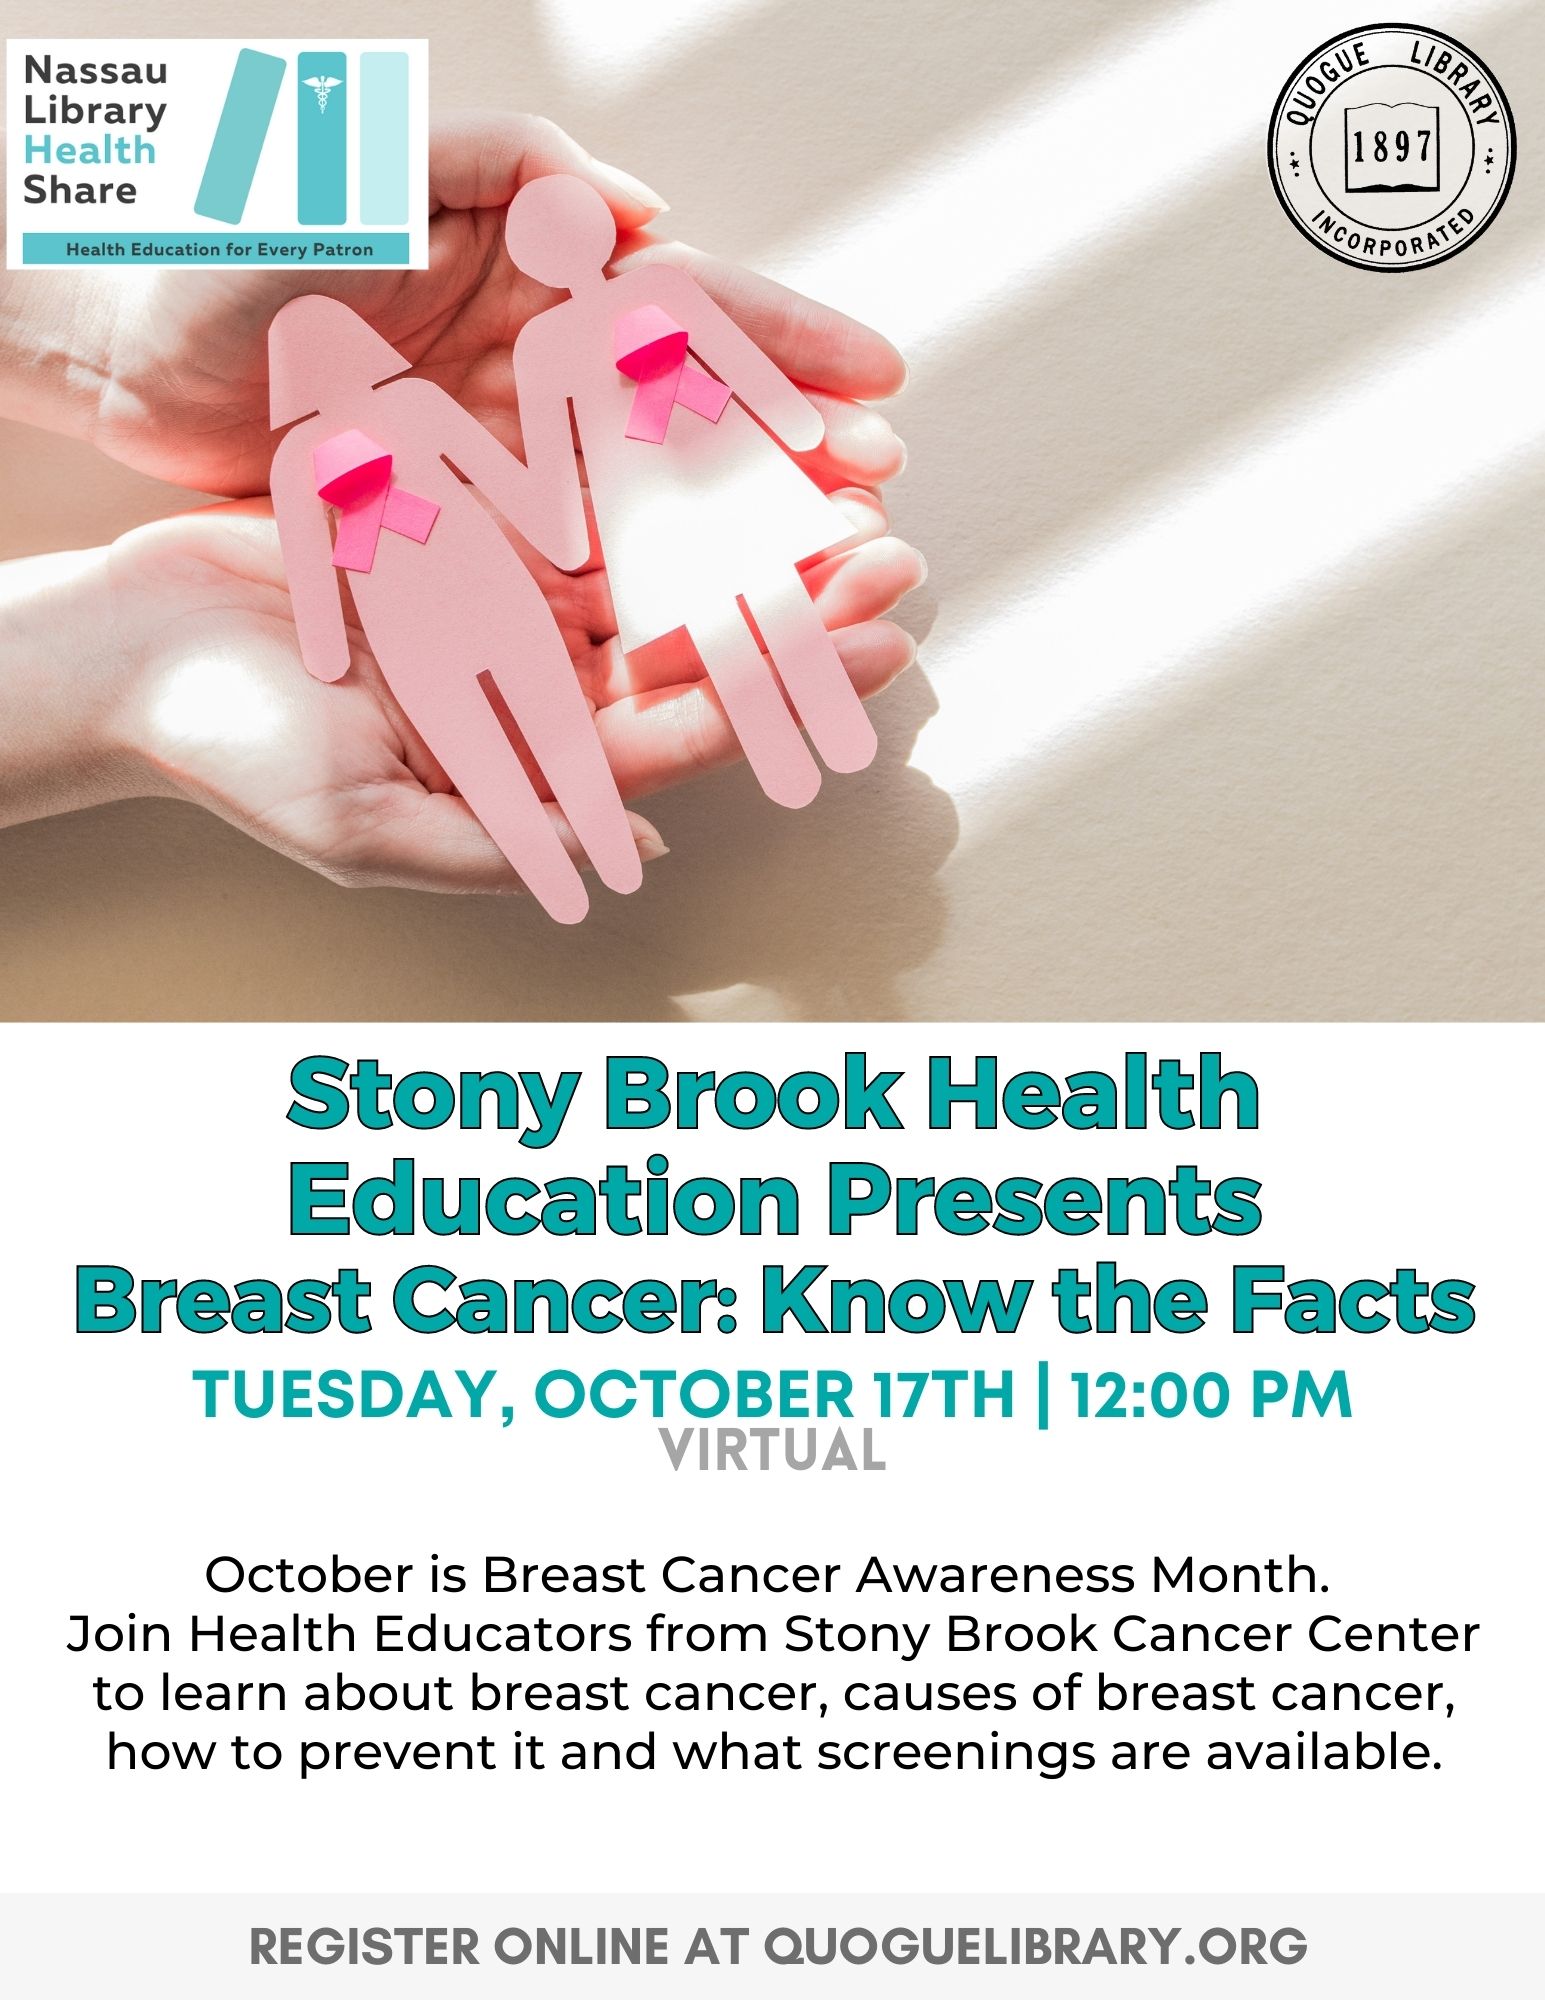 Stony Brook Health Education Presents Breast Cancer: Know the Facts